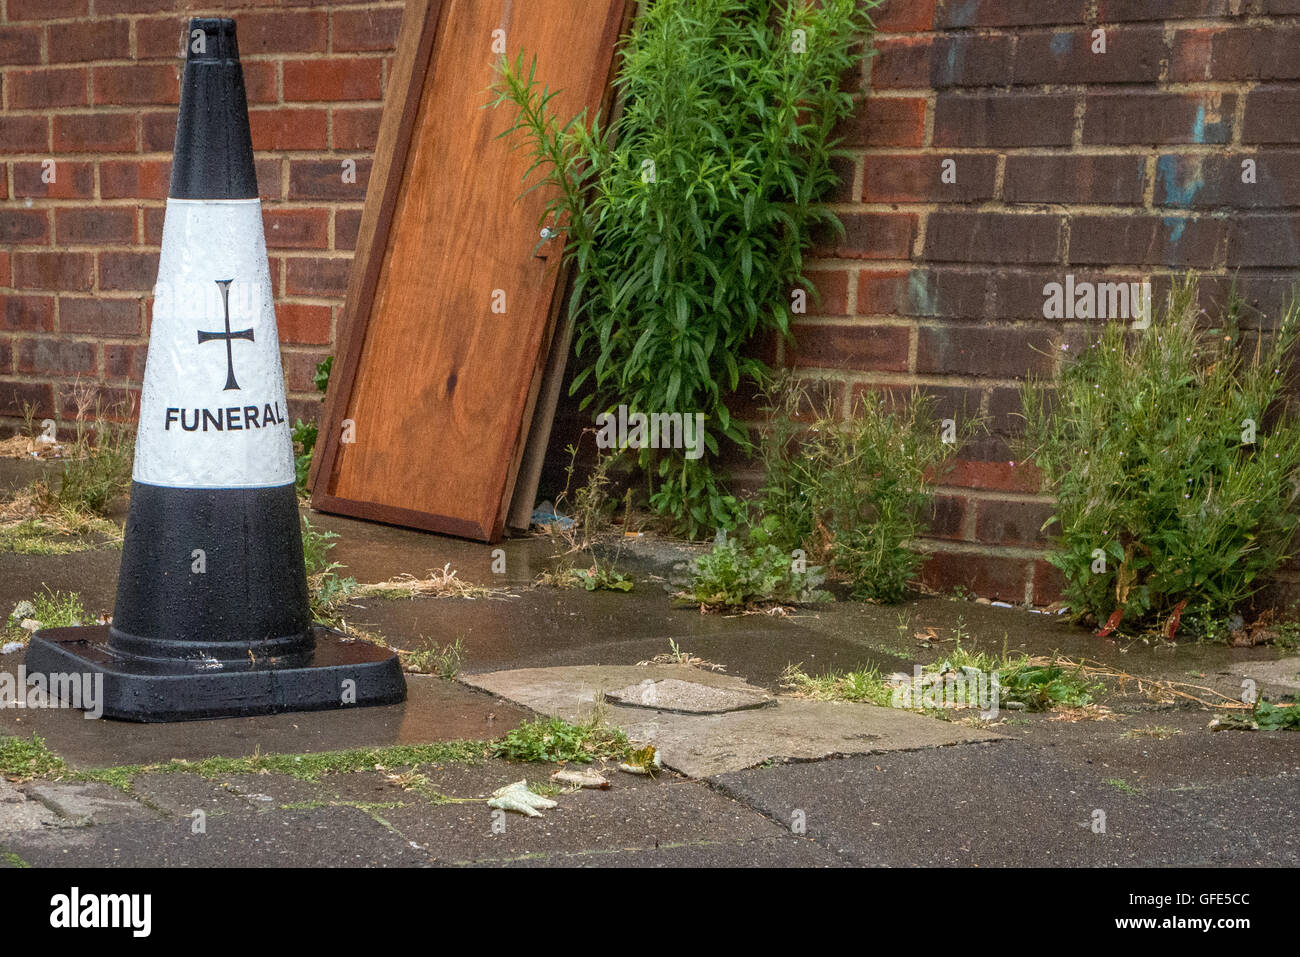 A funeral bollard seen on the streets of Brighton. Stock Photo